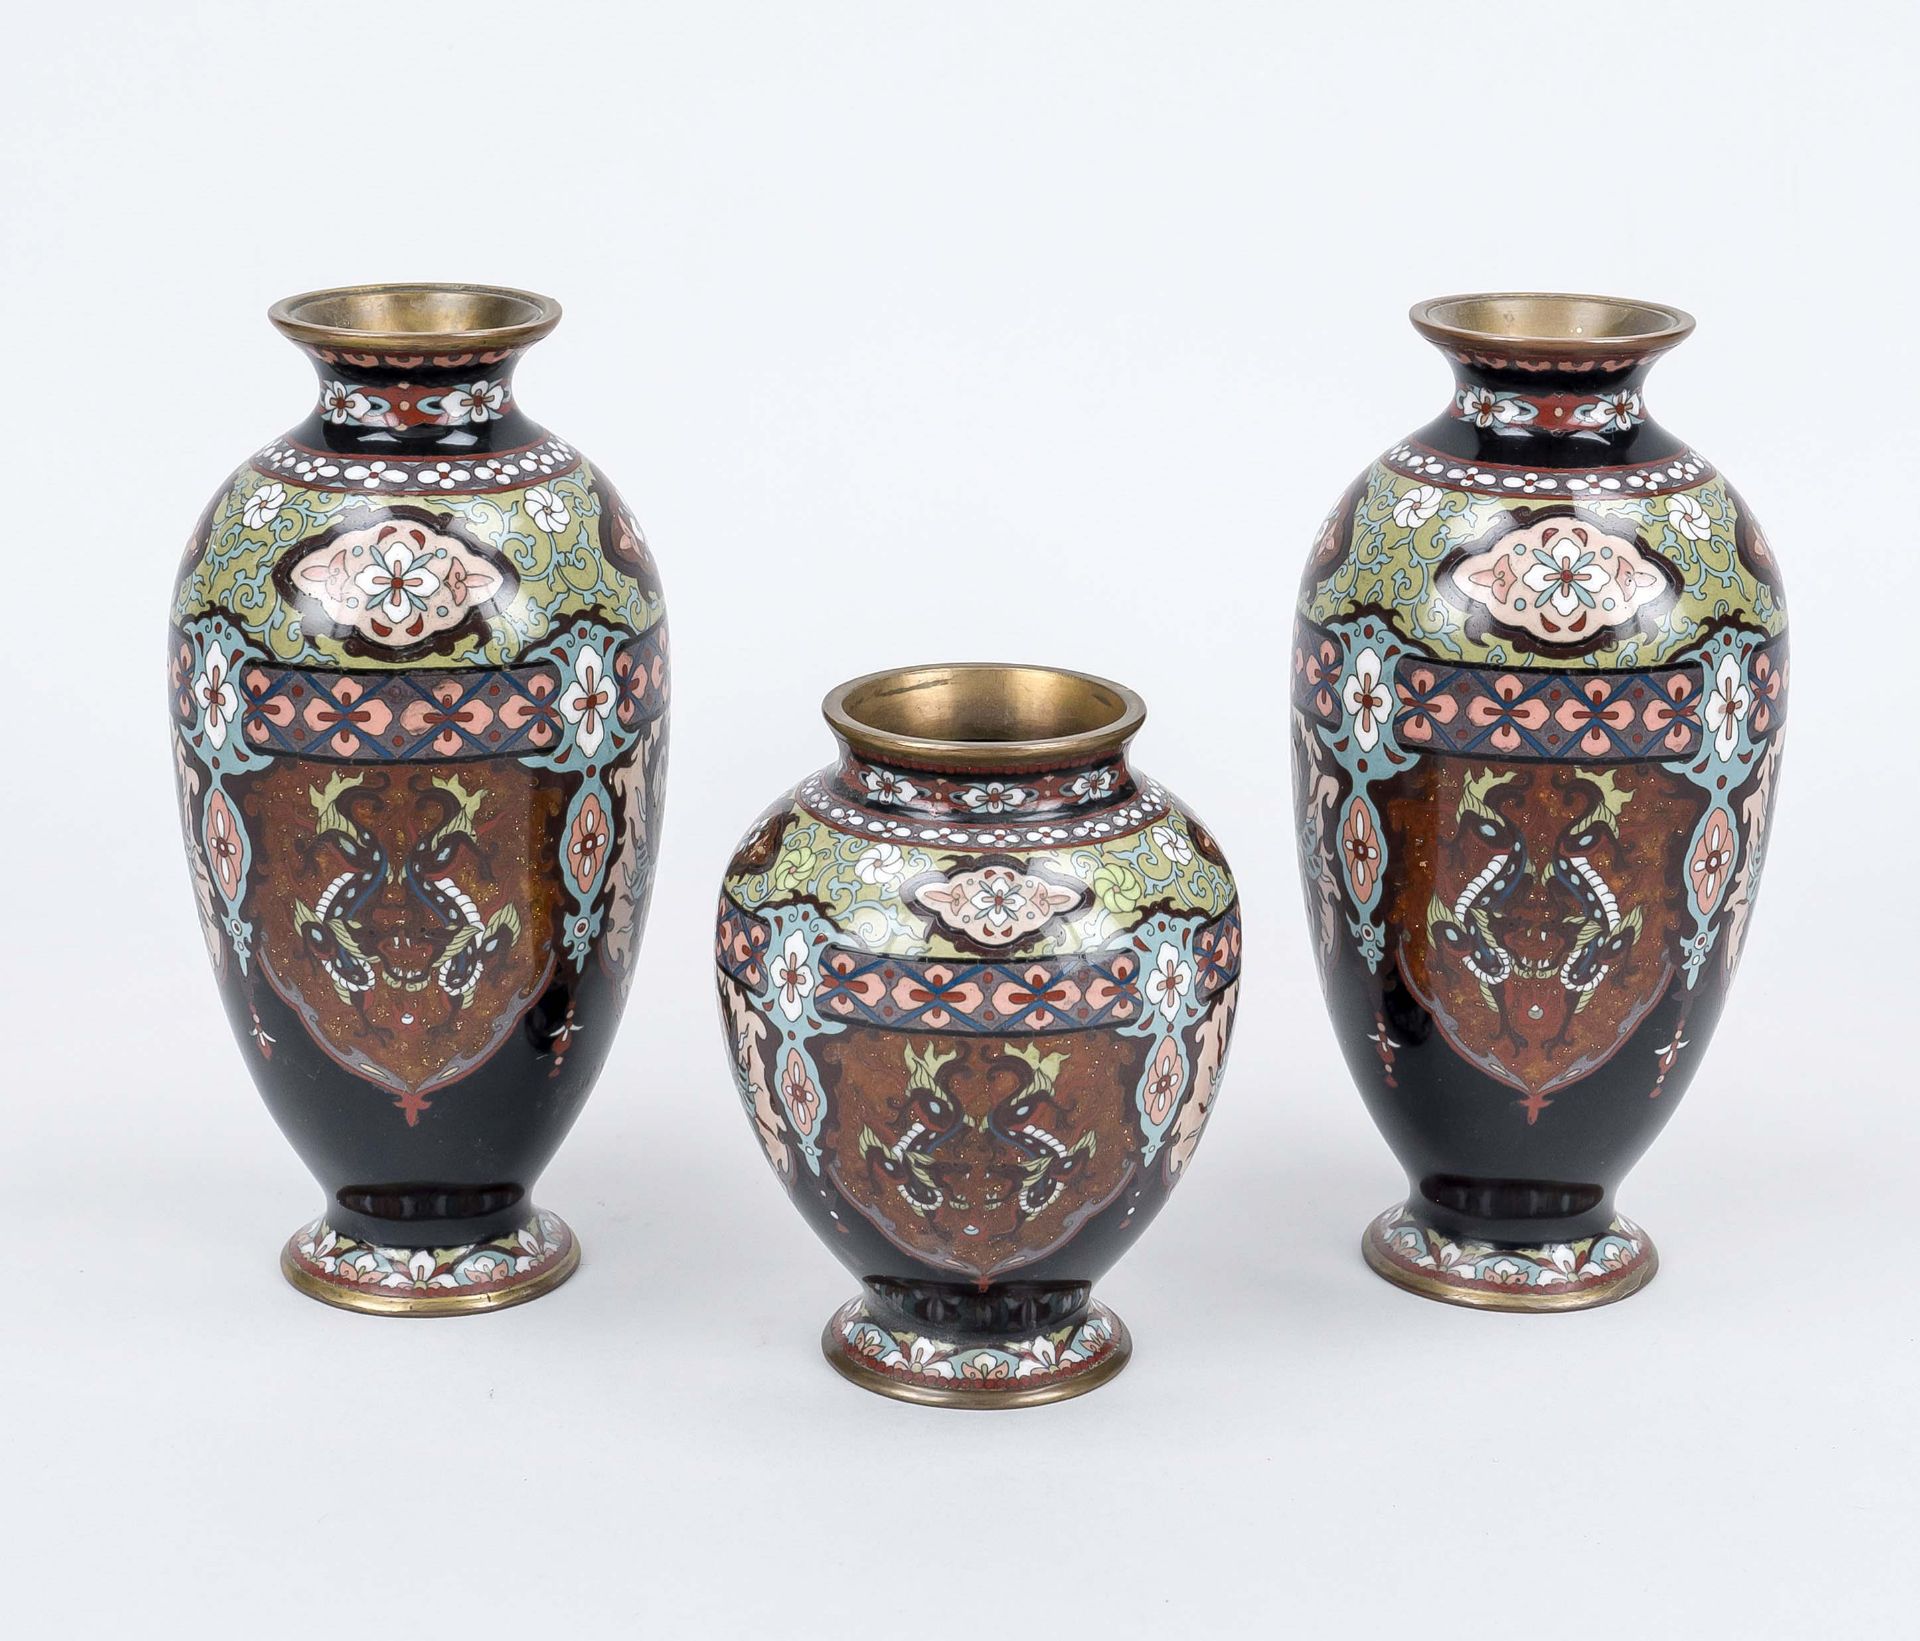 Cloisonné vase set, Japan c. 1900 (Meiji). A pair and a smaller one, rubbed and slightly chipped, h.